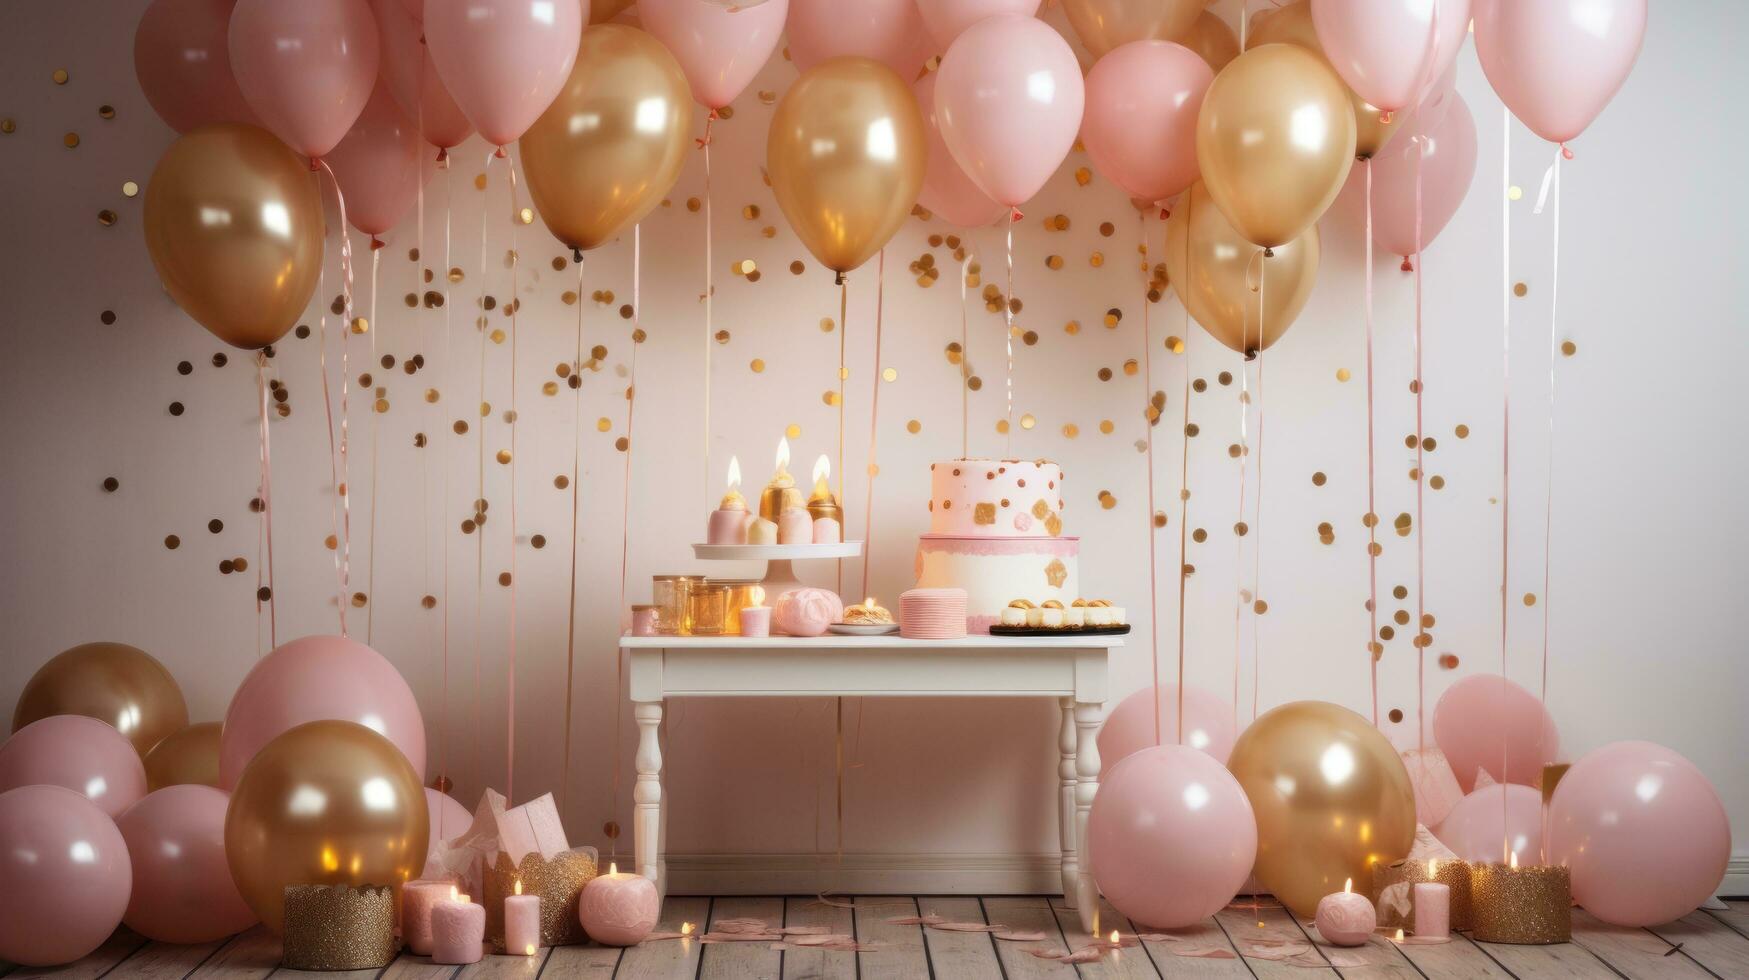 Cozy pink and gold setup with floral accents and desserts photo